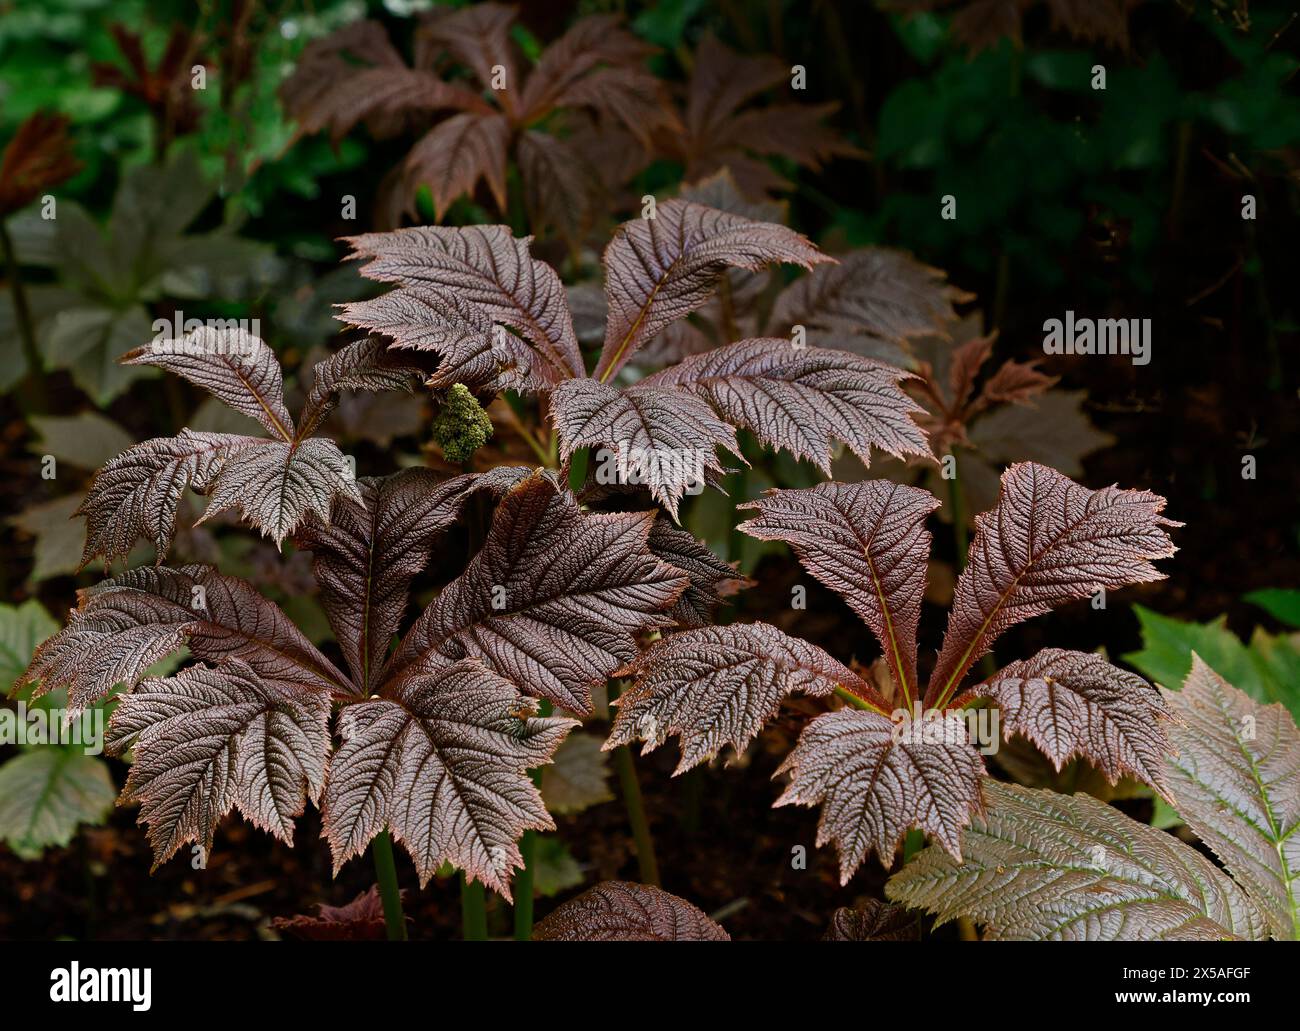 Closeup of the bronze coloured leaves of the ornamental herbaceous perennial Rodgersia podophylla donard selection. Stock Photo